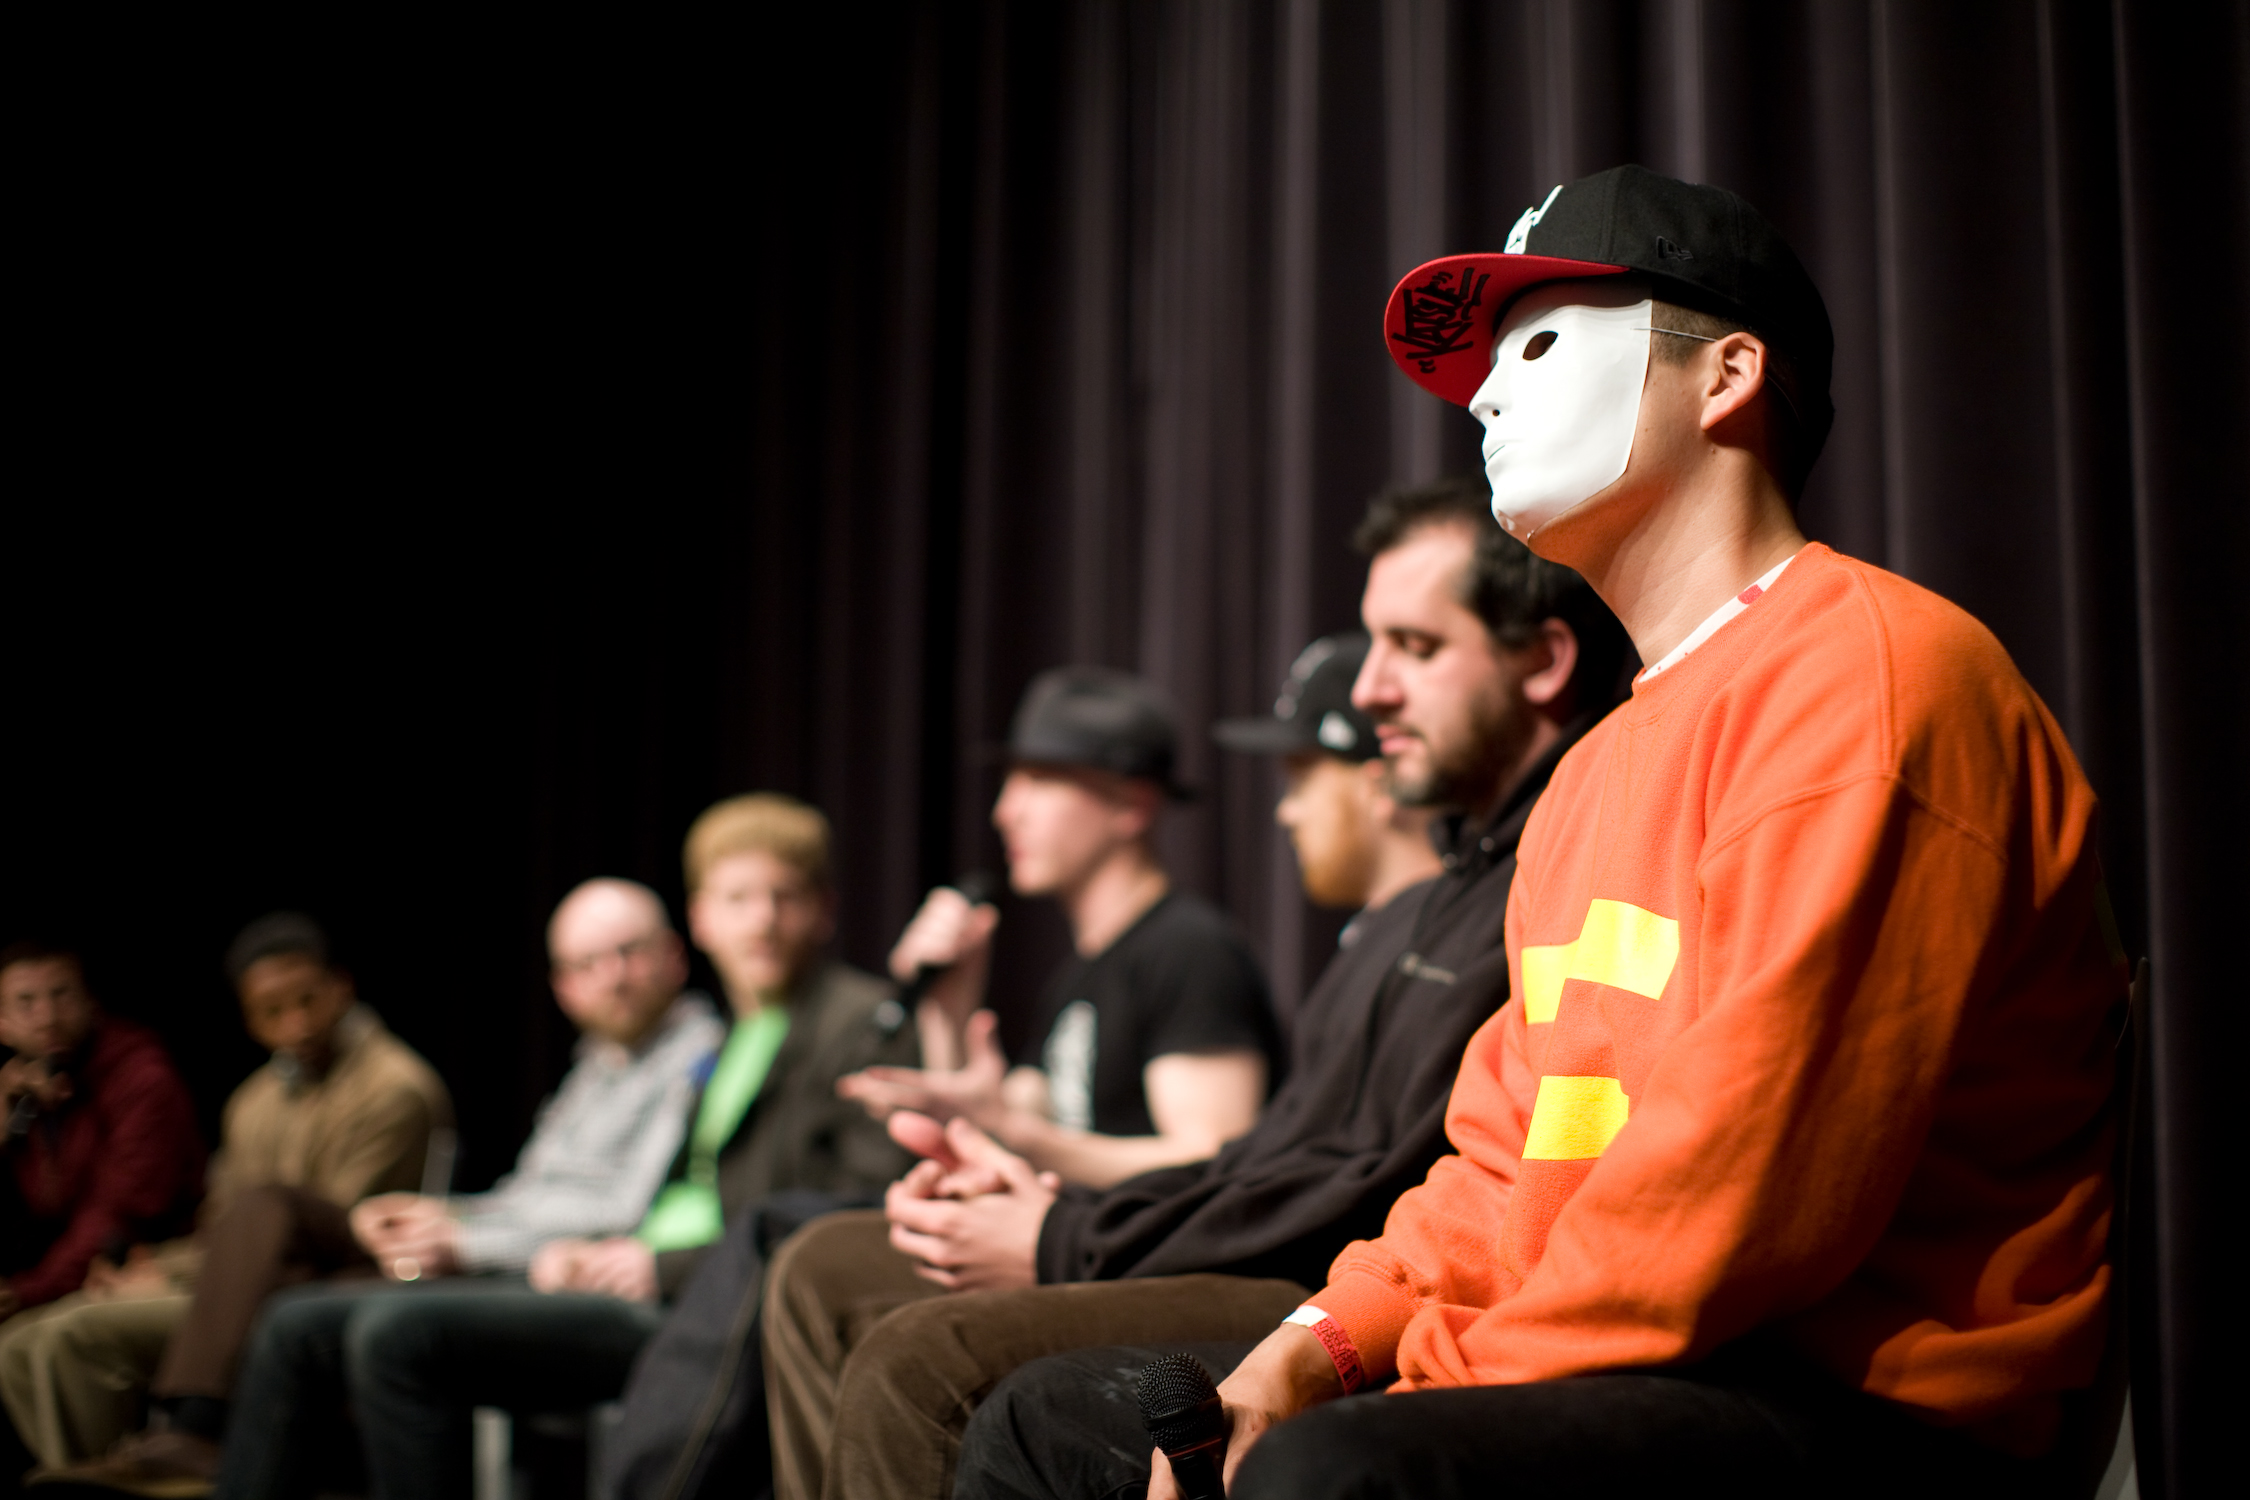 people wearing masks in a darkened room while others watch